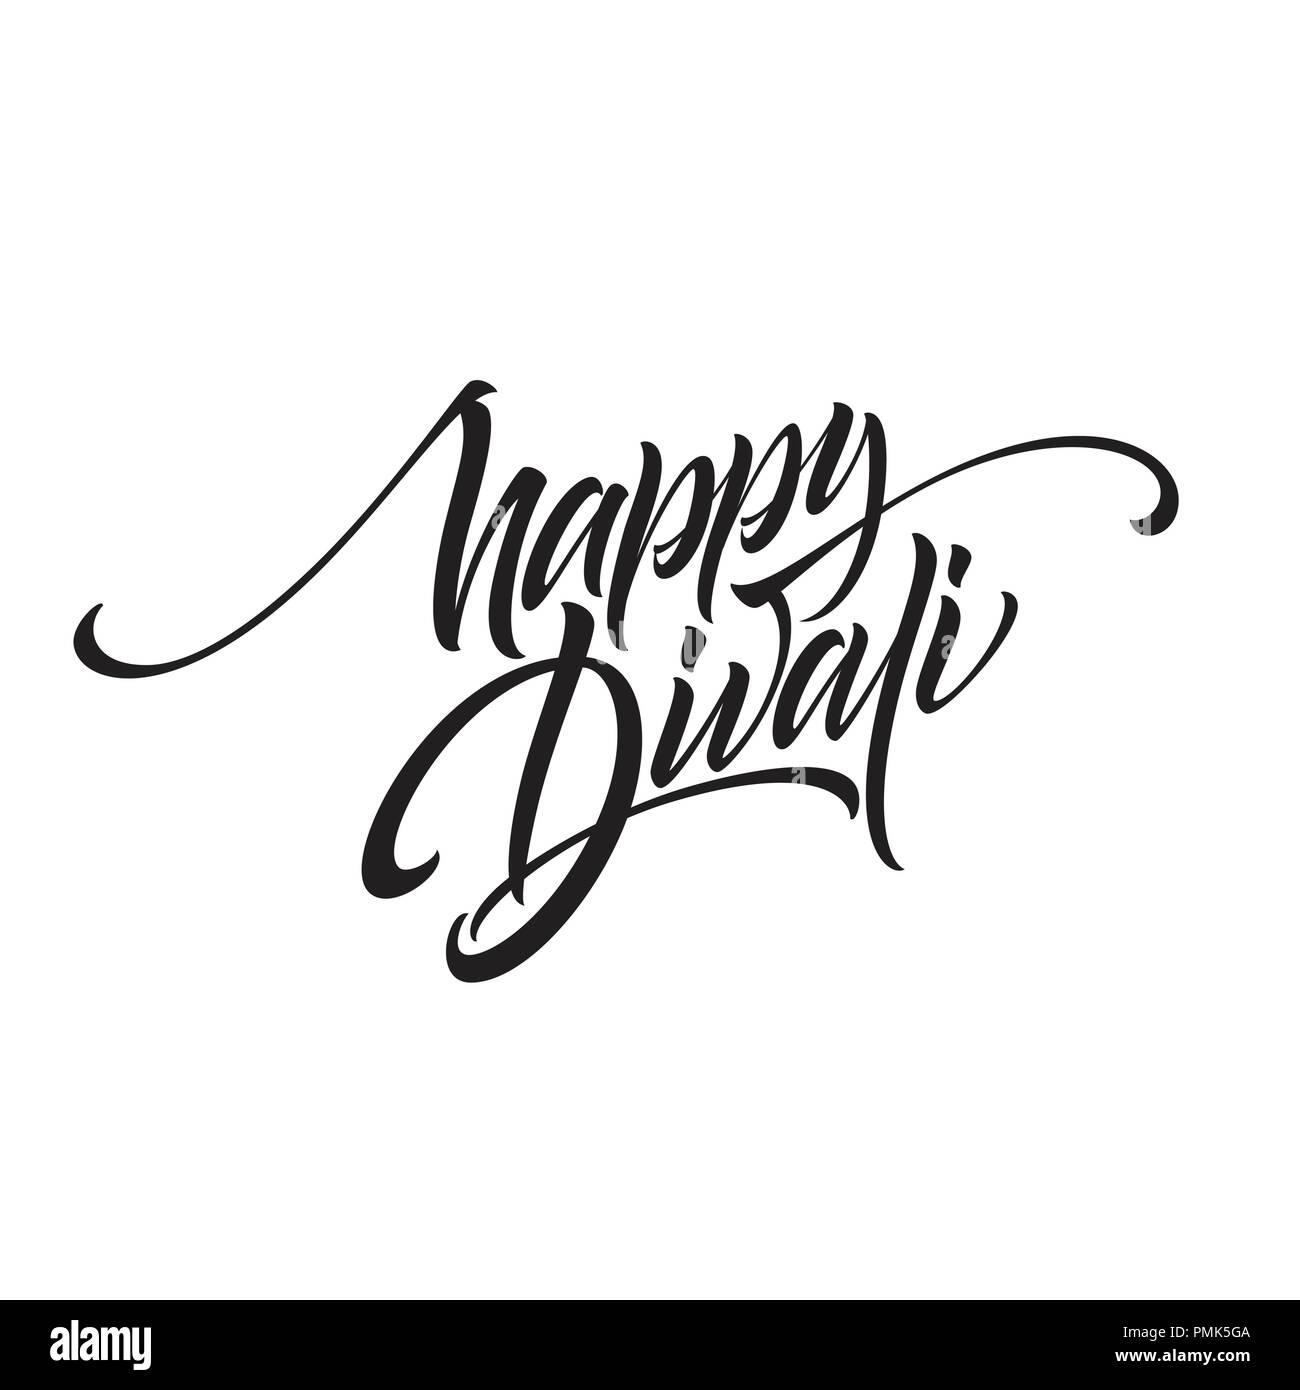 Happy divali festival of lights black calligraphy hand lettering text isolated on white background. Vector illustration Stock Vector